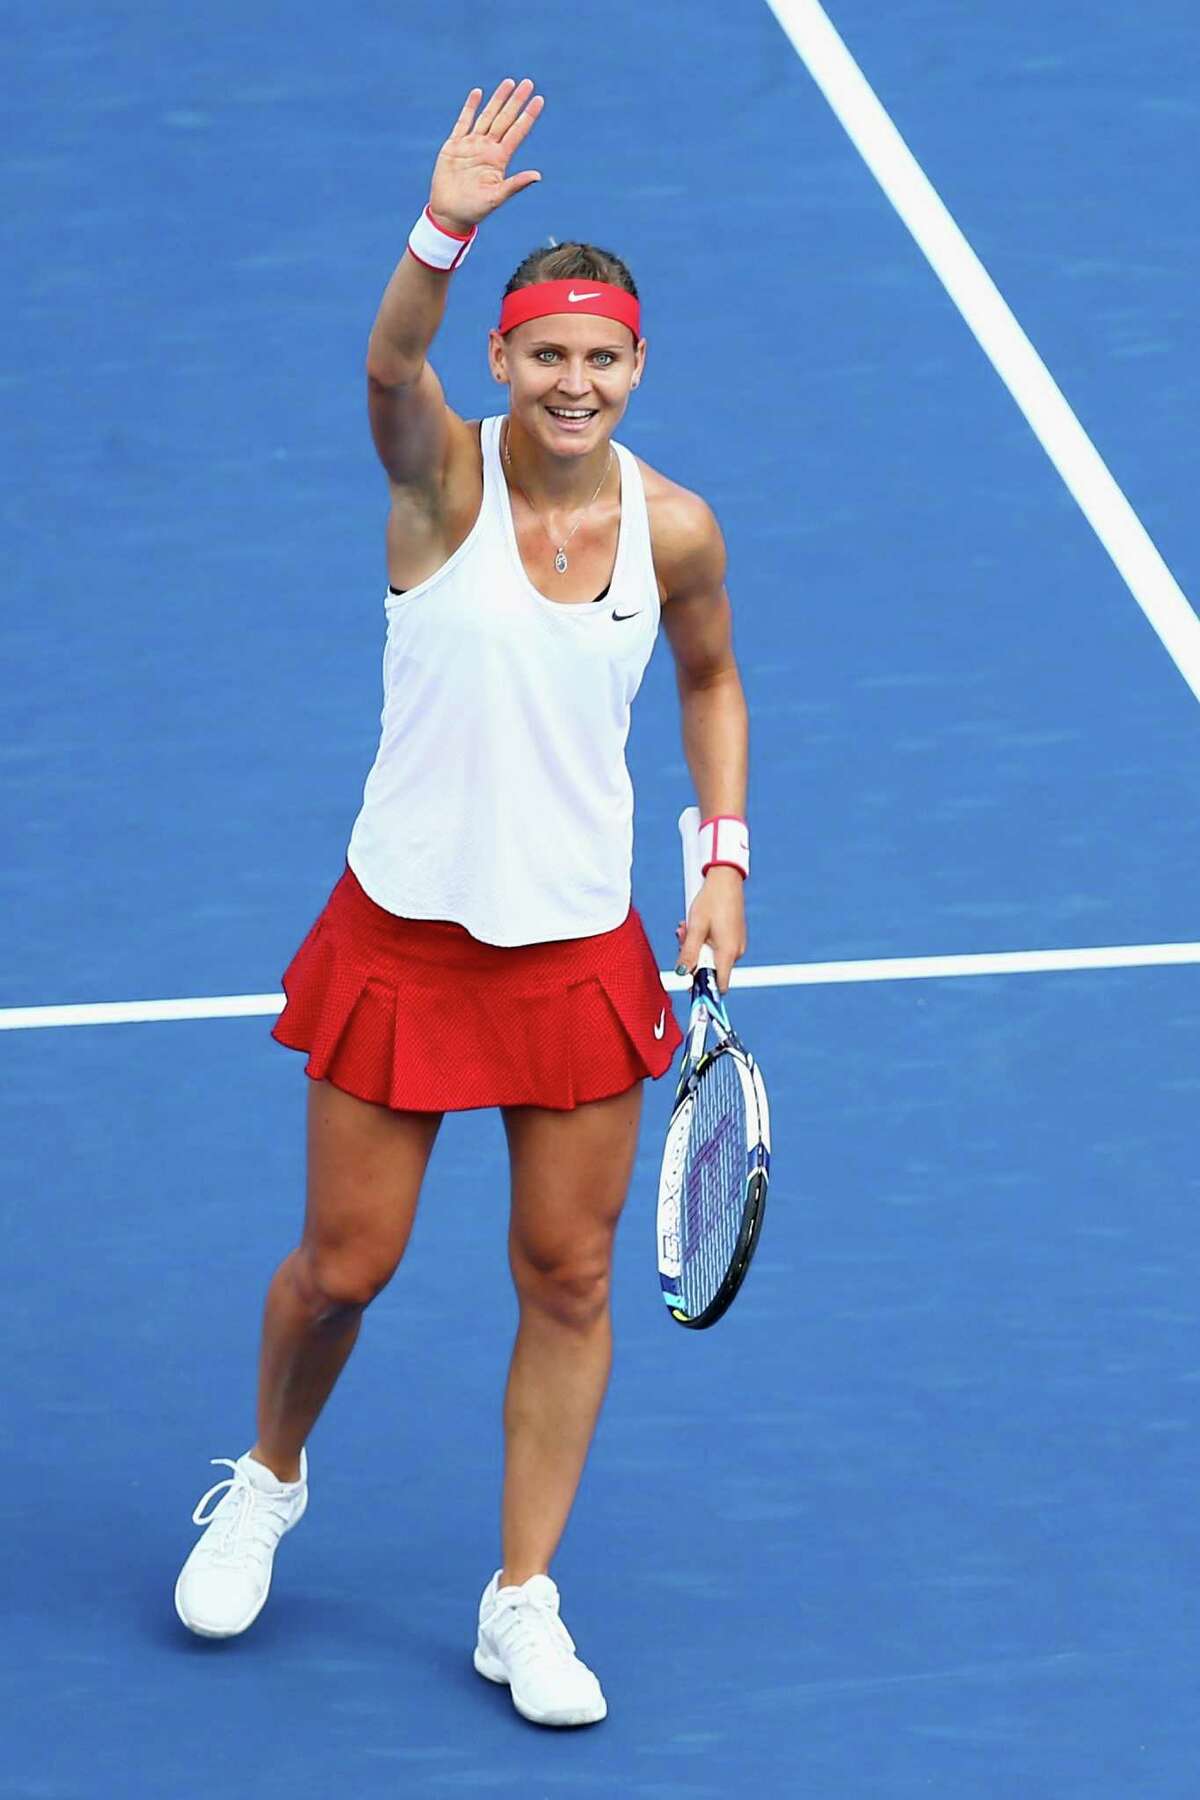 NEW HAVEN, CT - AUGUST 28: Lucie Safarova of Czech Republic celebrates her win over Lesia Tsurenko of Ukraine during the semifinal round of the Connecticut Open at Connecticut Tennis Center at Yale on August 28, 2015 in New Haven, Connecticut. (Photo by Maddie Meyer/Getty Images)